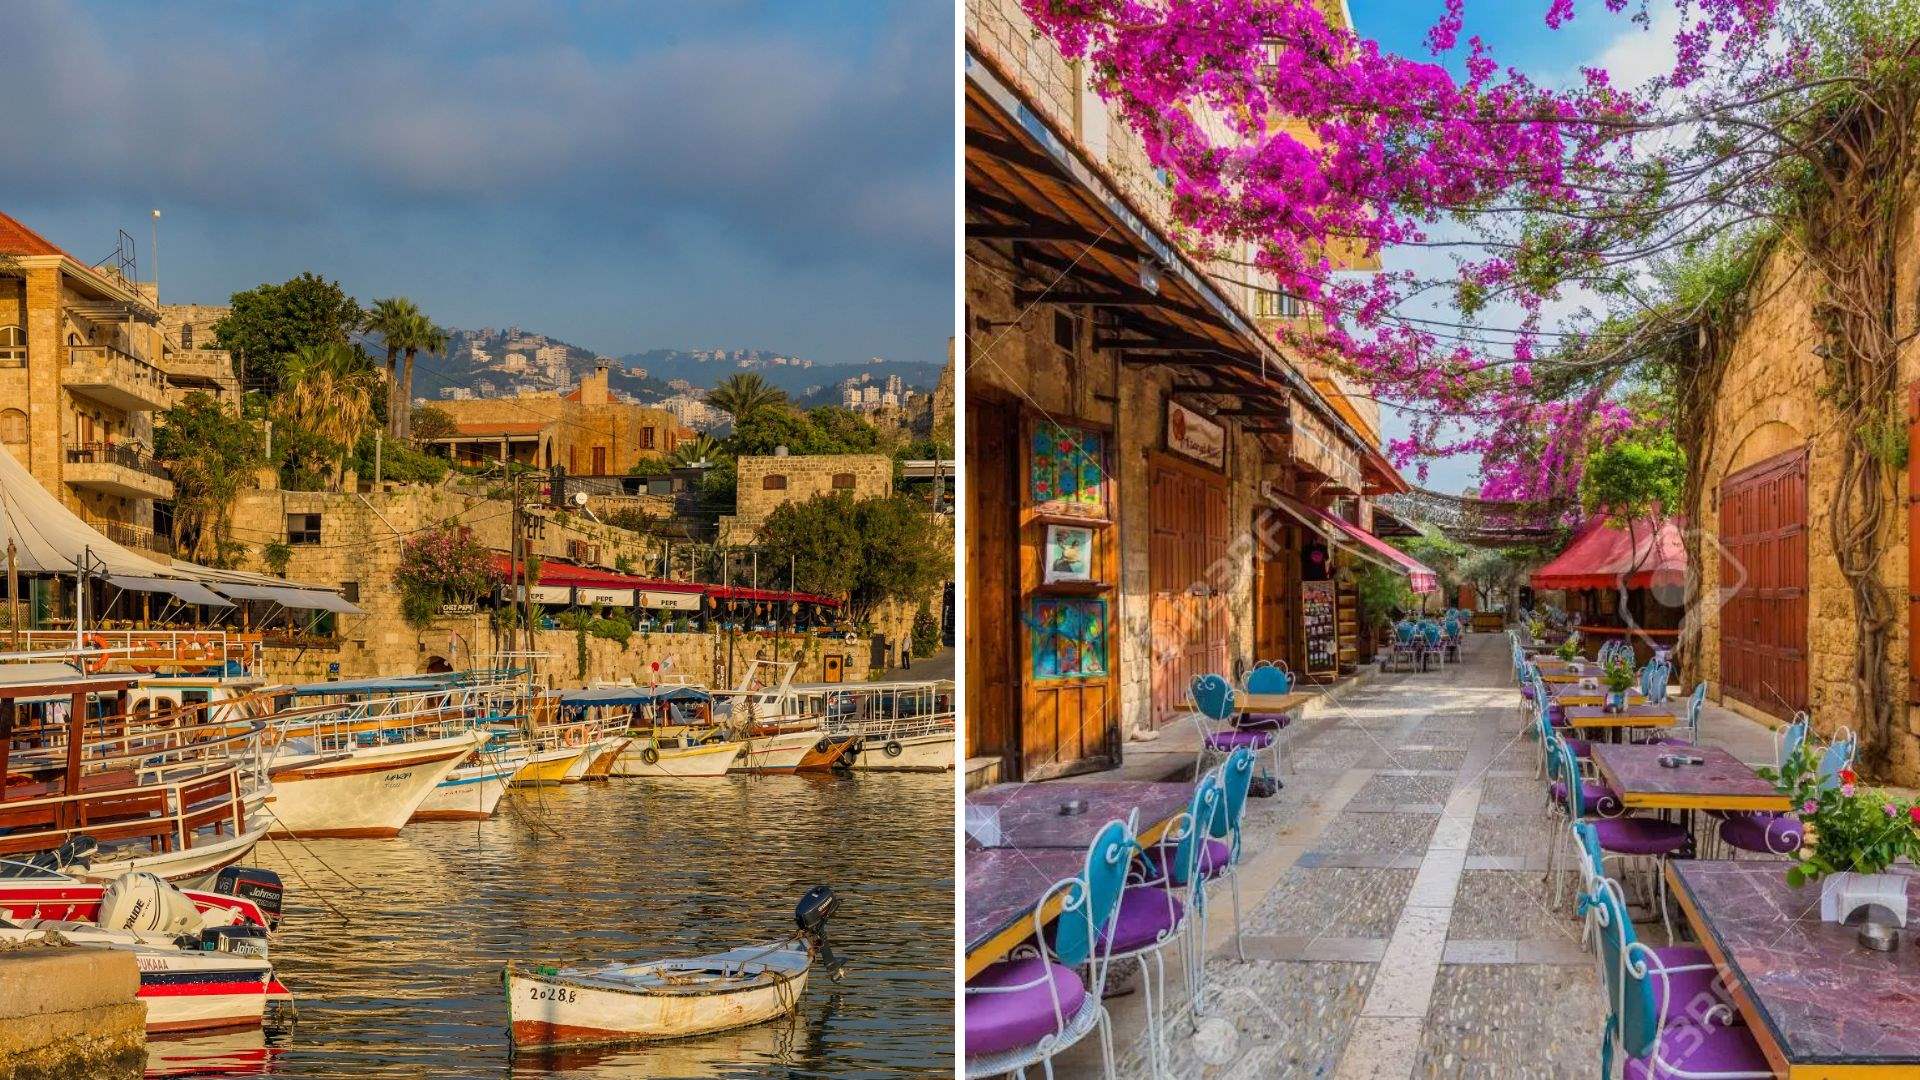 Ahla Bhal Talleh, Ahla: Byblos: Where ancient history, Mediterranean ambiance, and modern charm collide